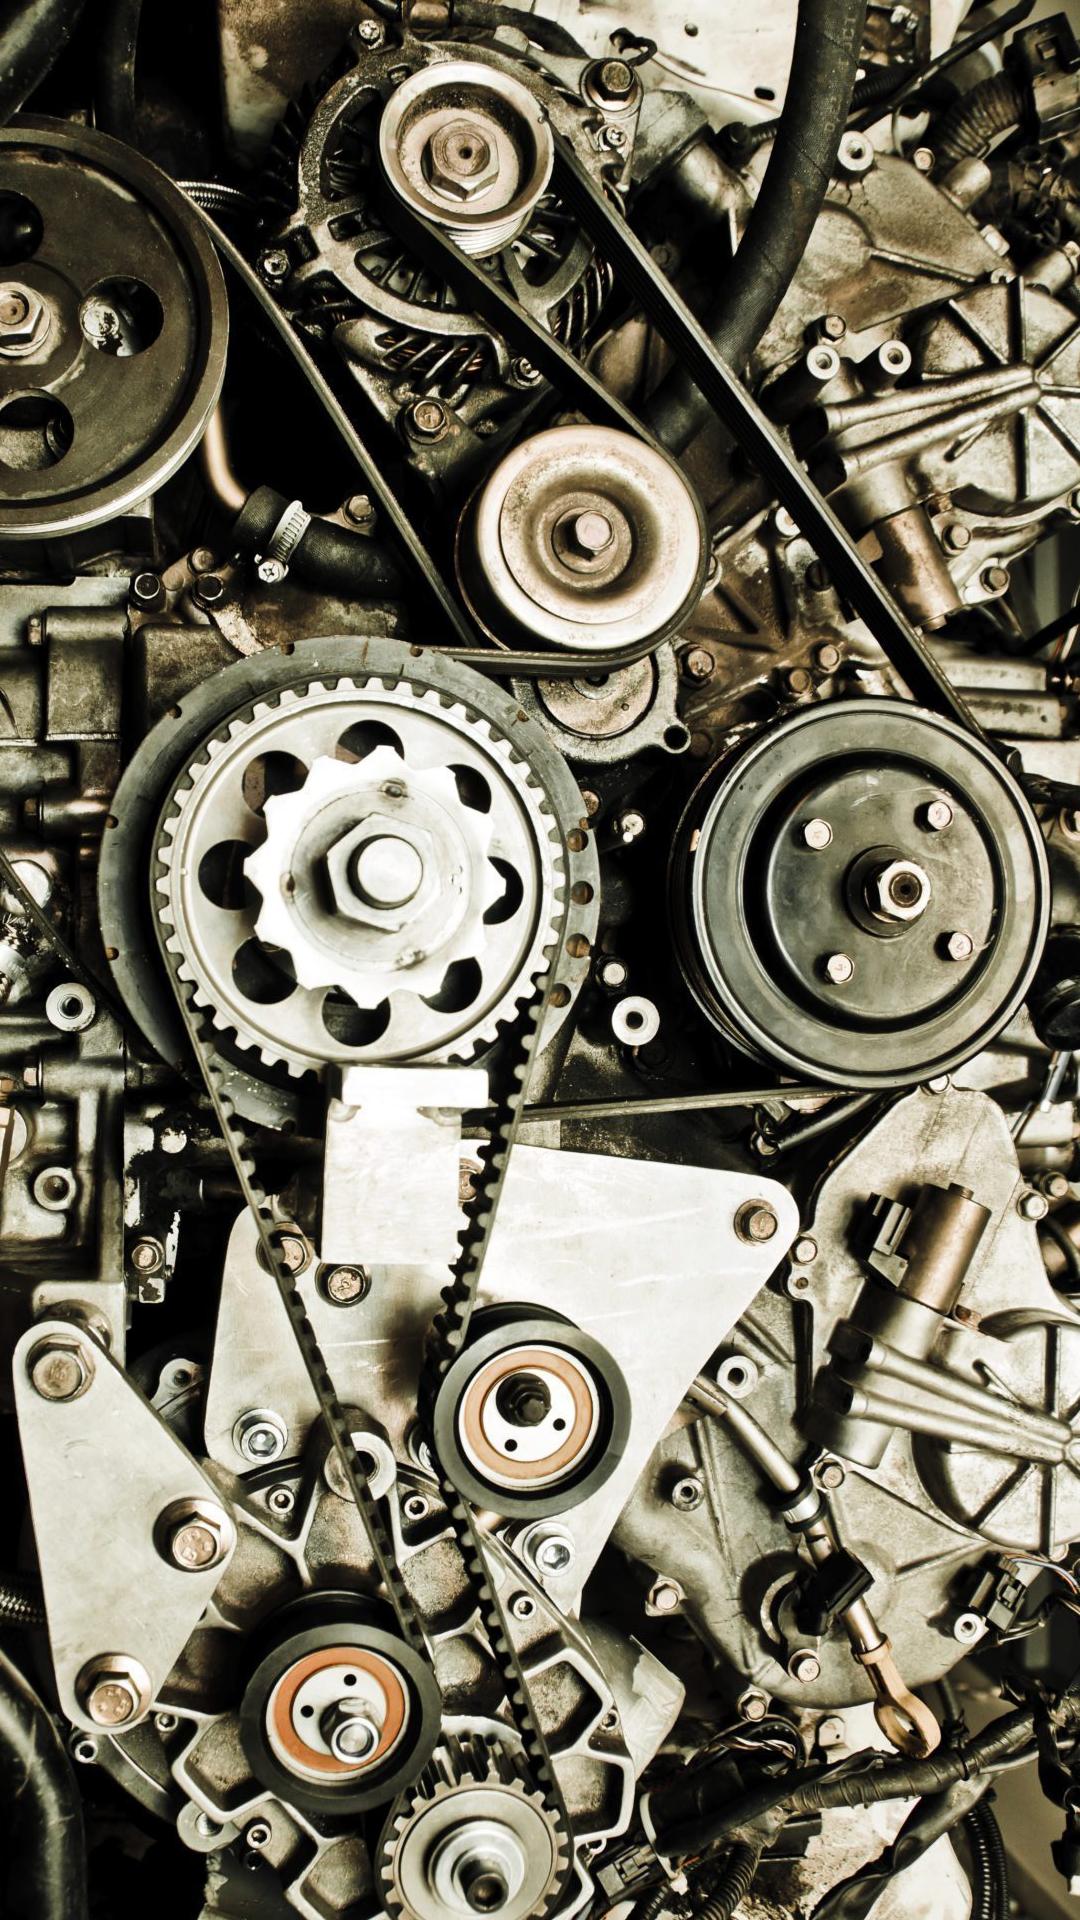 Mechanical Gear Apus Live Wallpaper For Android Apk